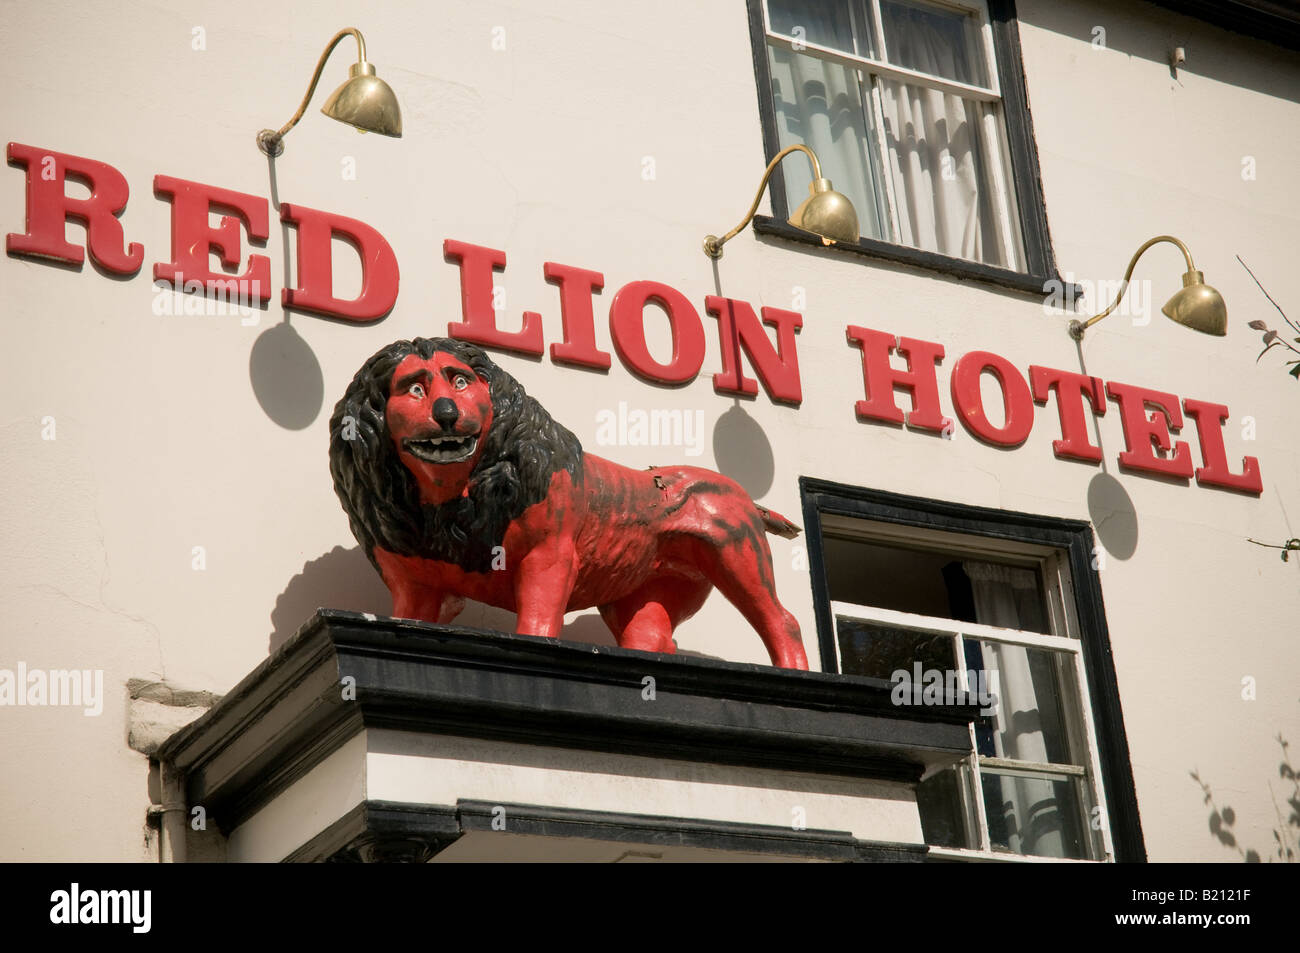 Carved wooden painted effigy of a lion outside the Red Lion Hotel Llanidloes Powys Wales UK Stock Photo